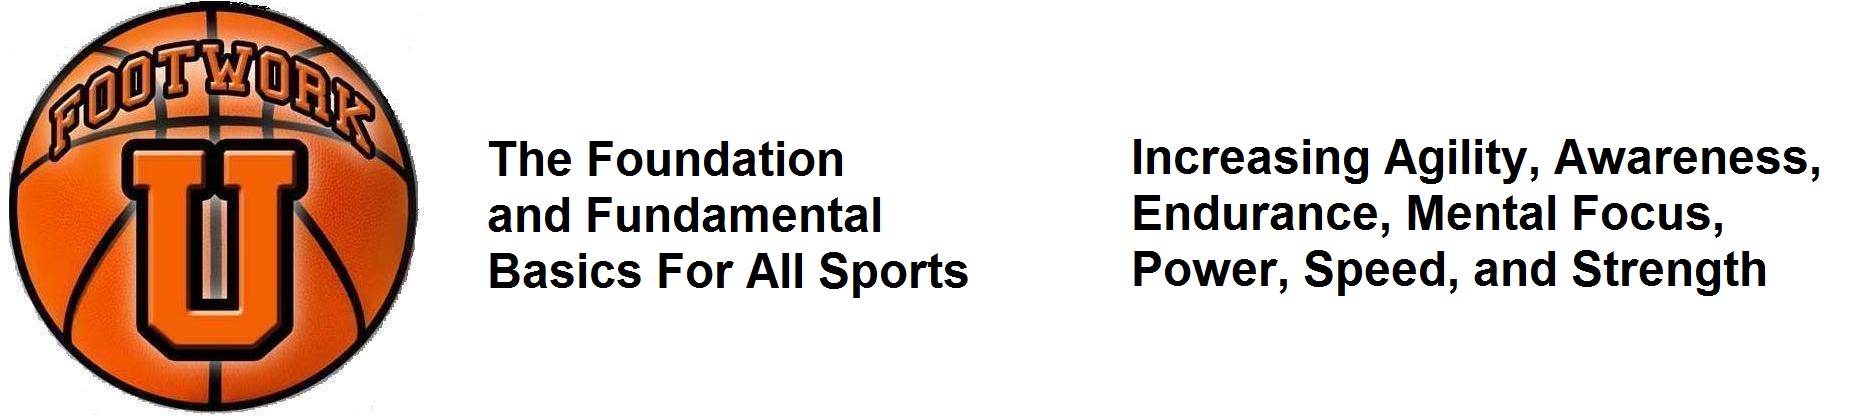 The Foundation Basics For All Sports